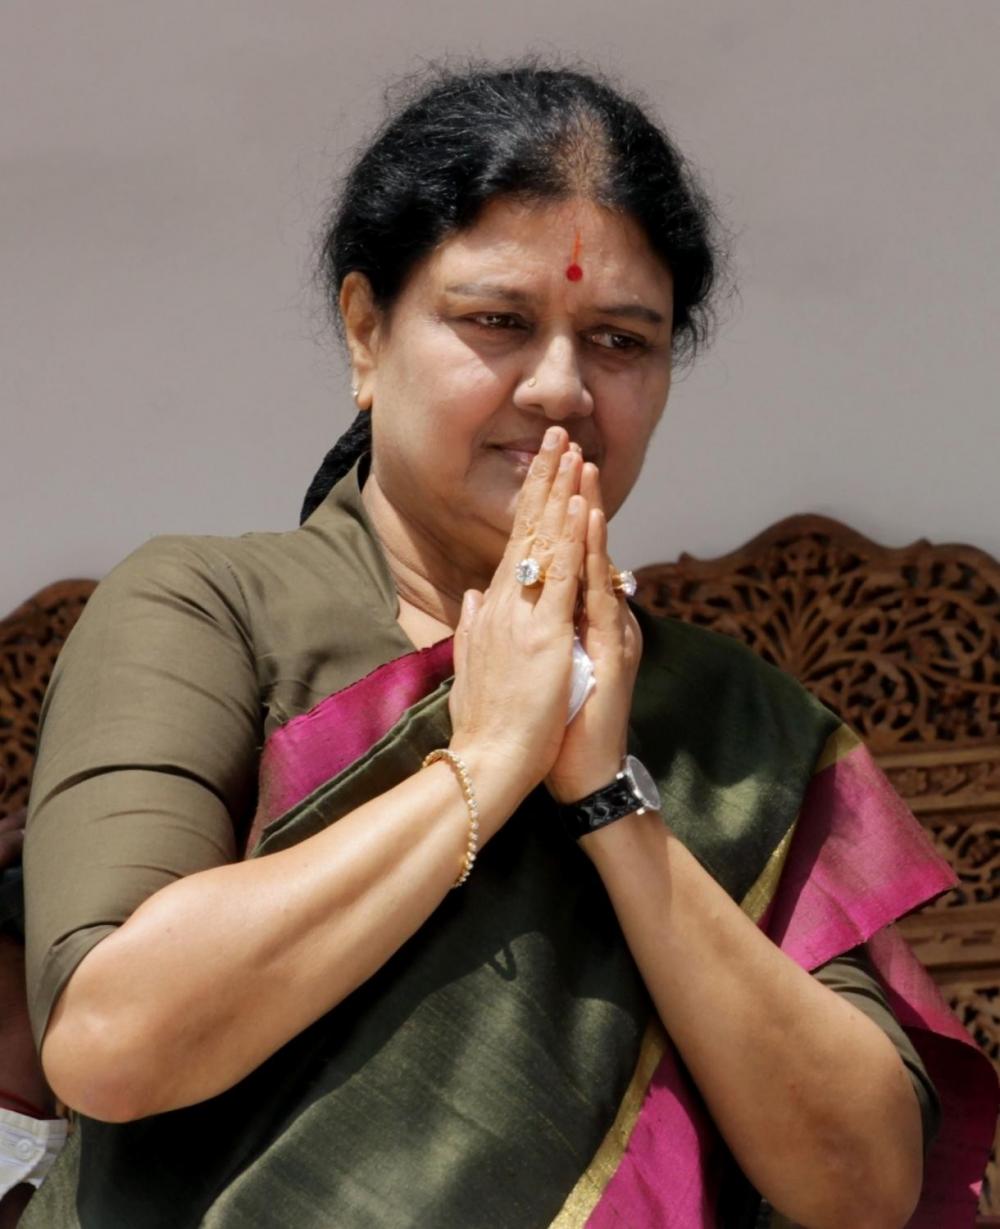 The Weekend Leader - AIADMK under pressure to bring in Sasikala to party fold